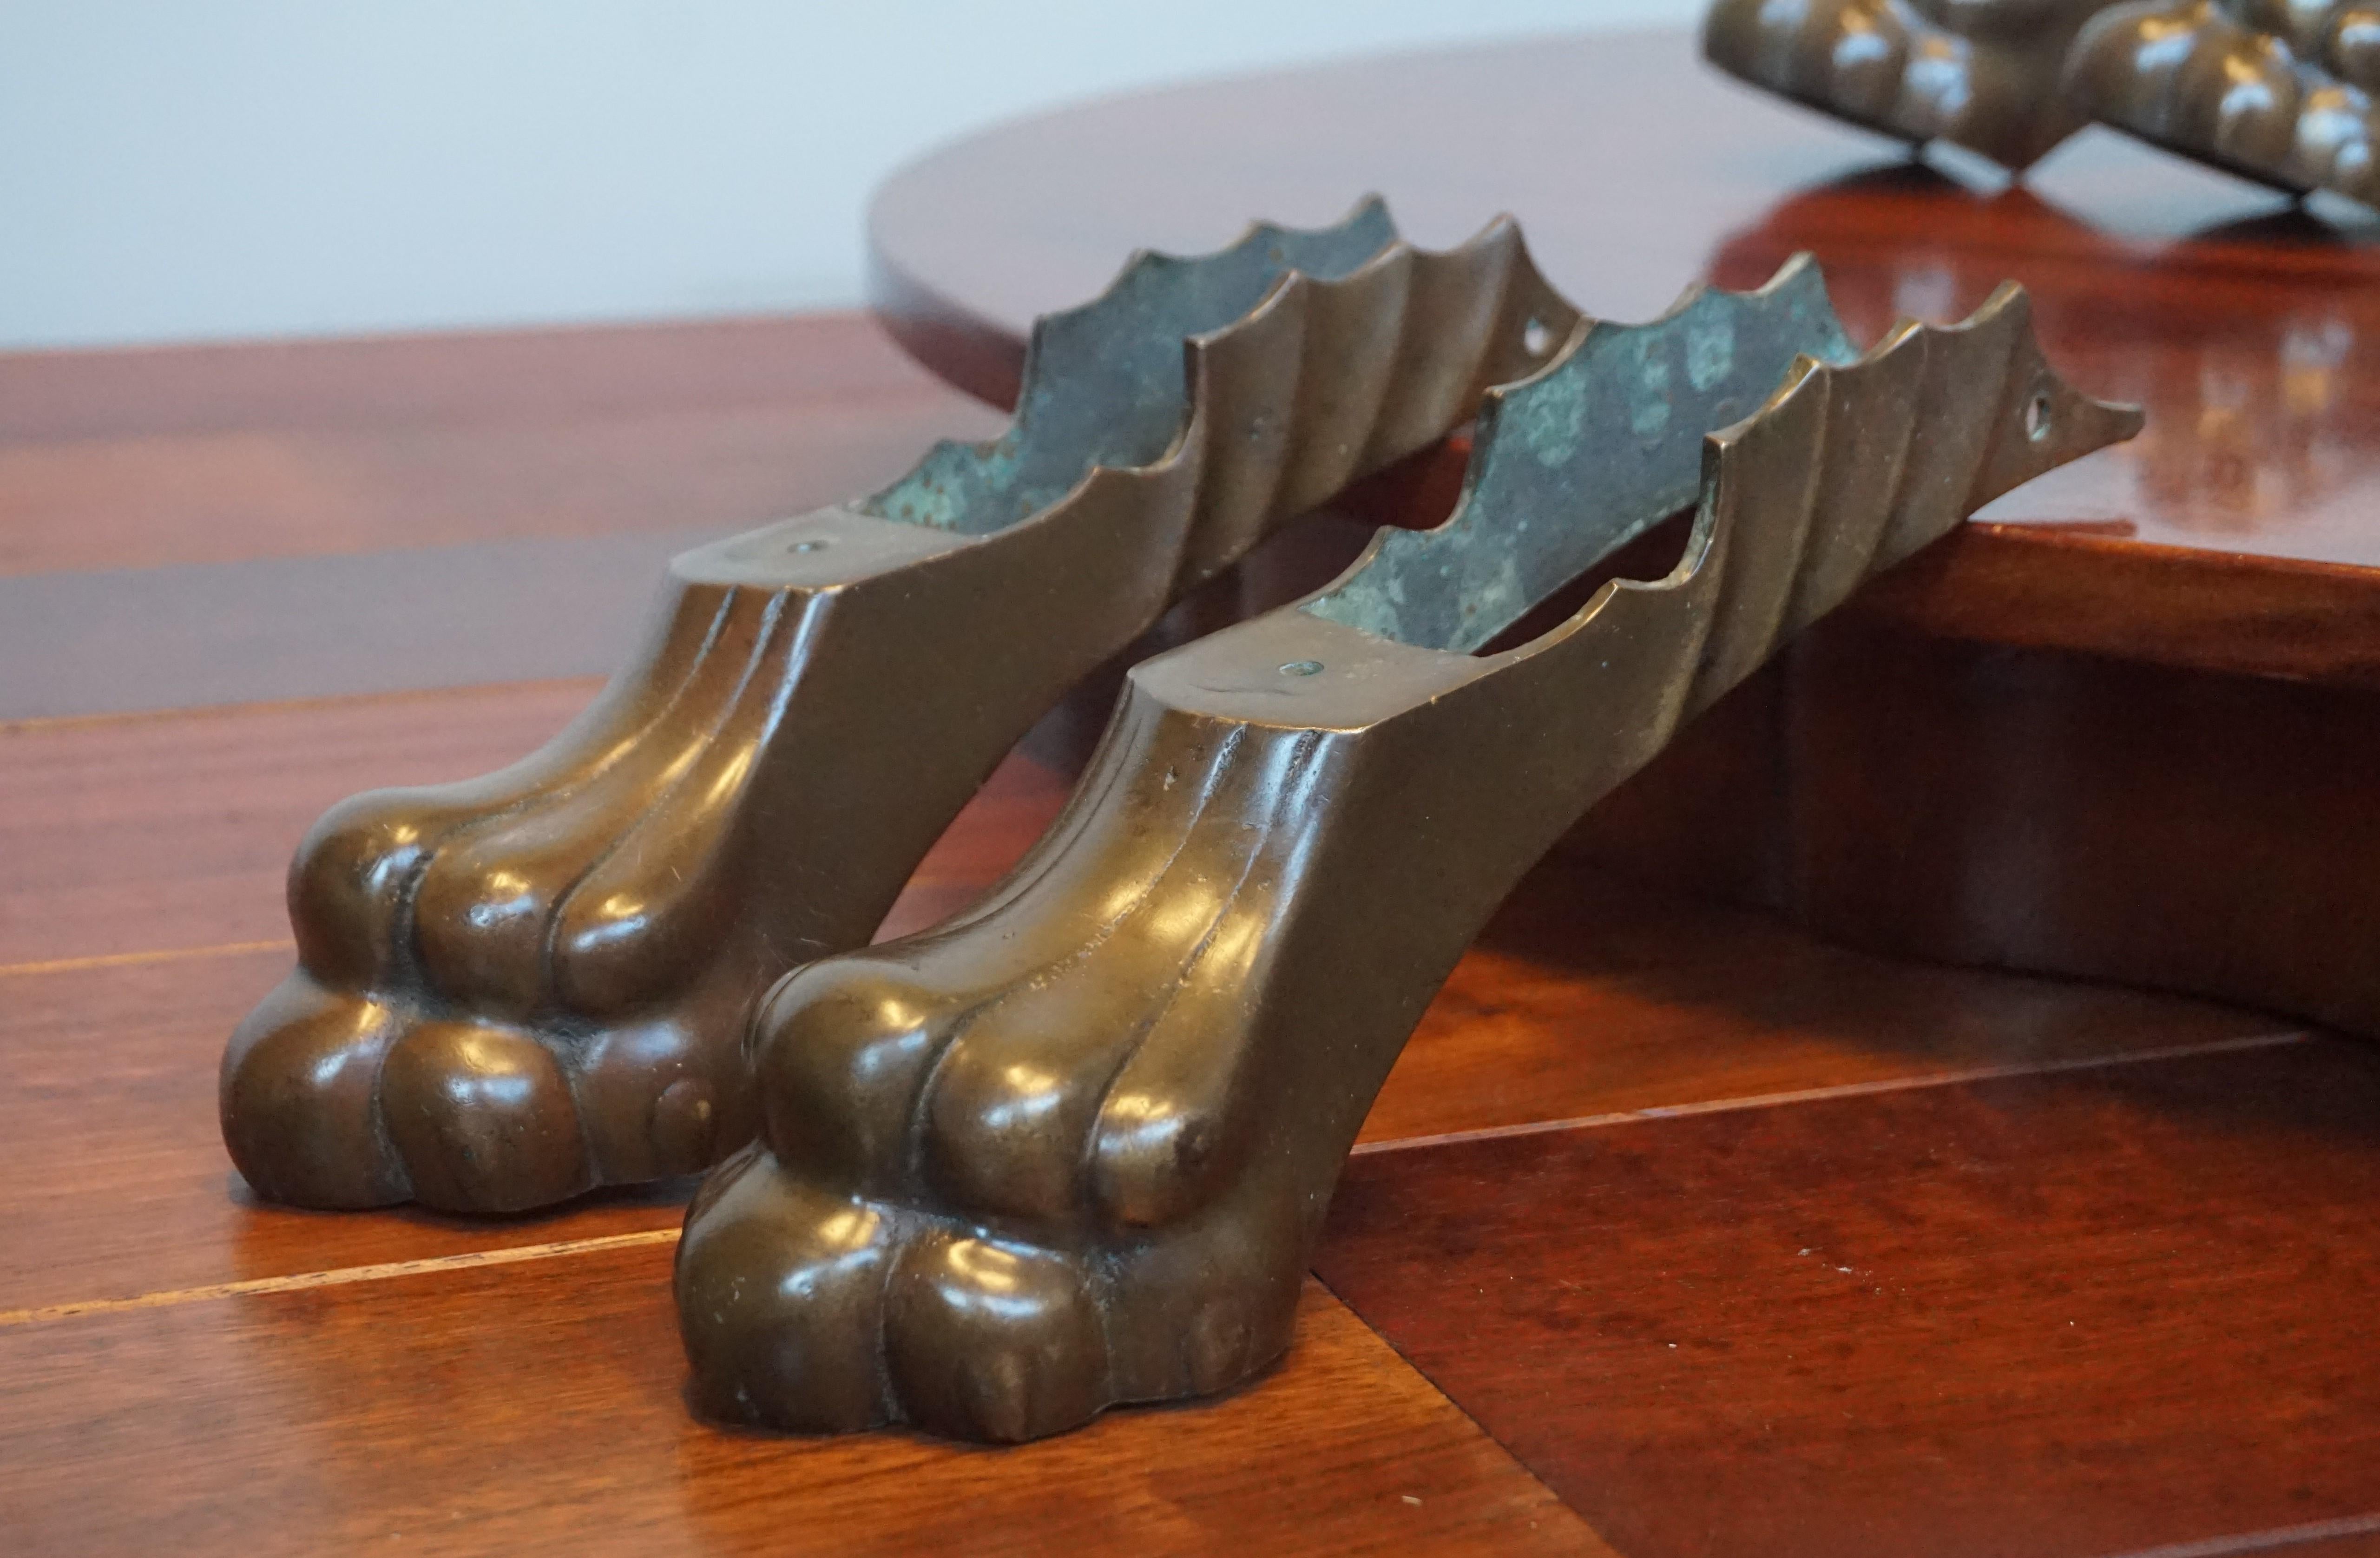 Stunning set of four 19th century, large bronze claw feet from a table or otherwise.

This large and impressive set of four top quality crafted bronze claw feet must have been under an amazing table or under a kingsize sideboard. Due to all kinds